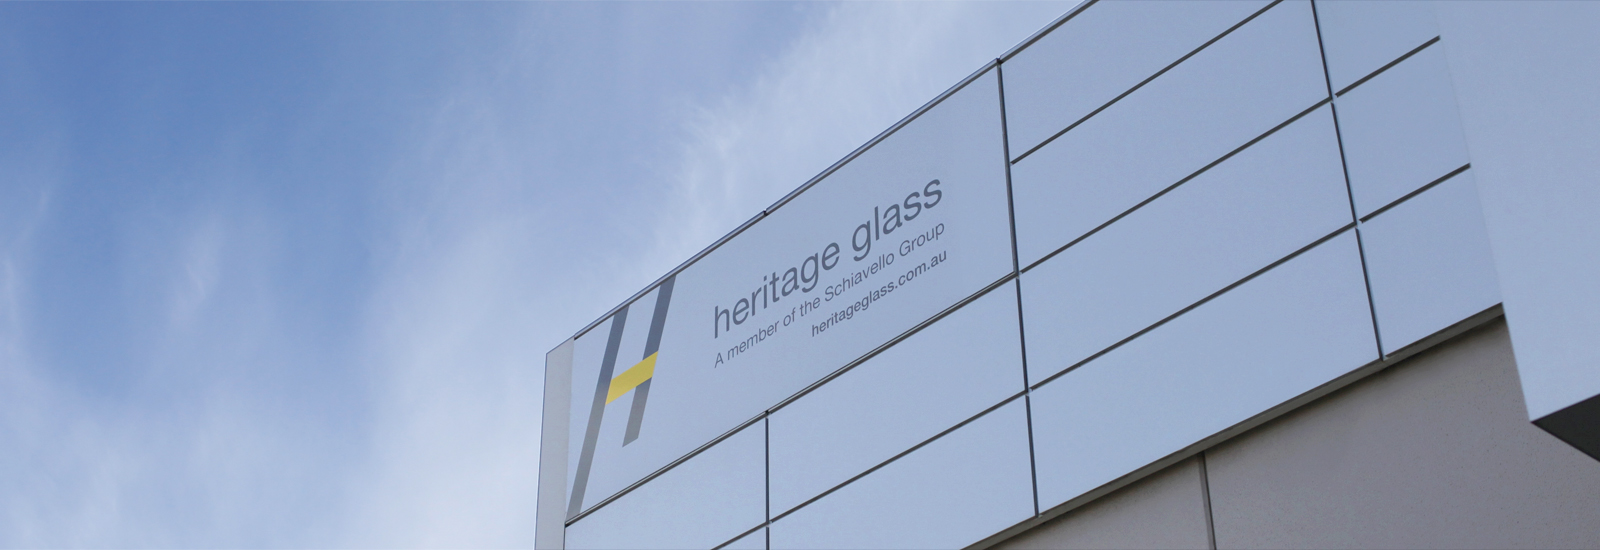 about heritage glass